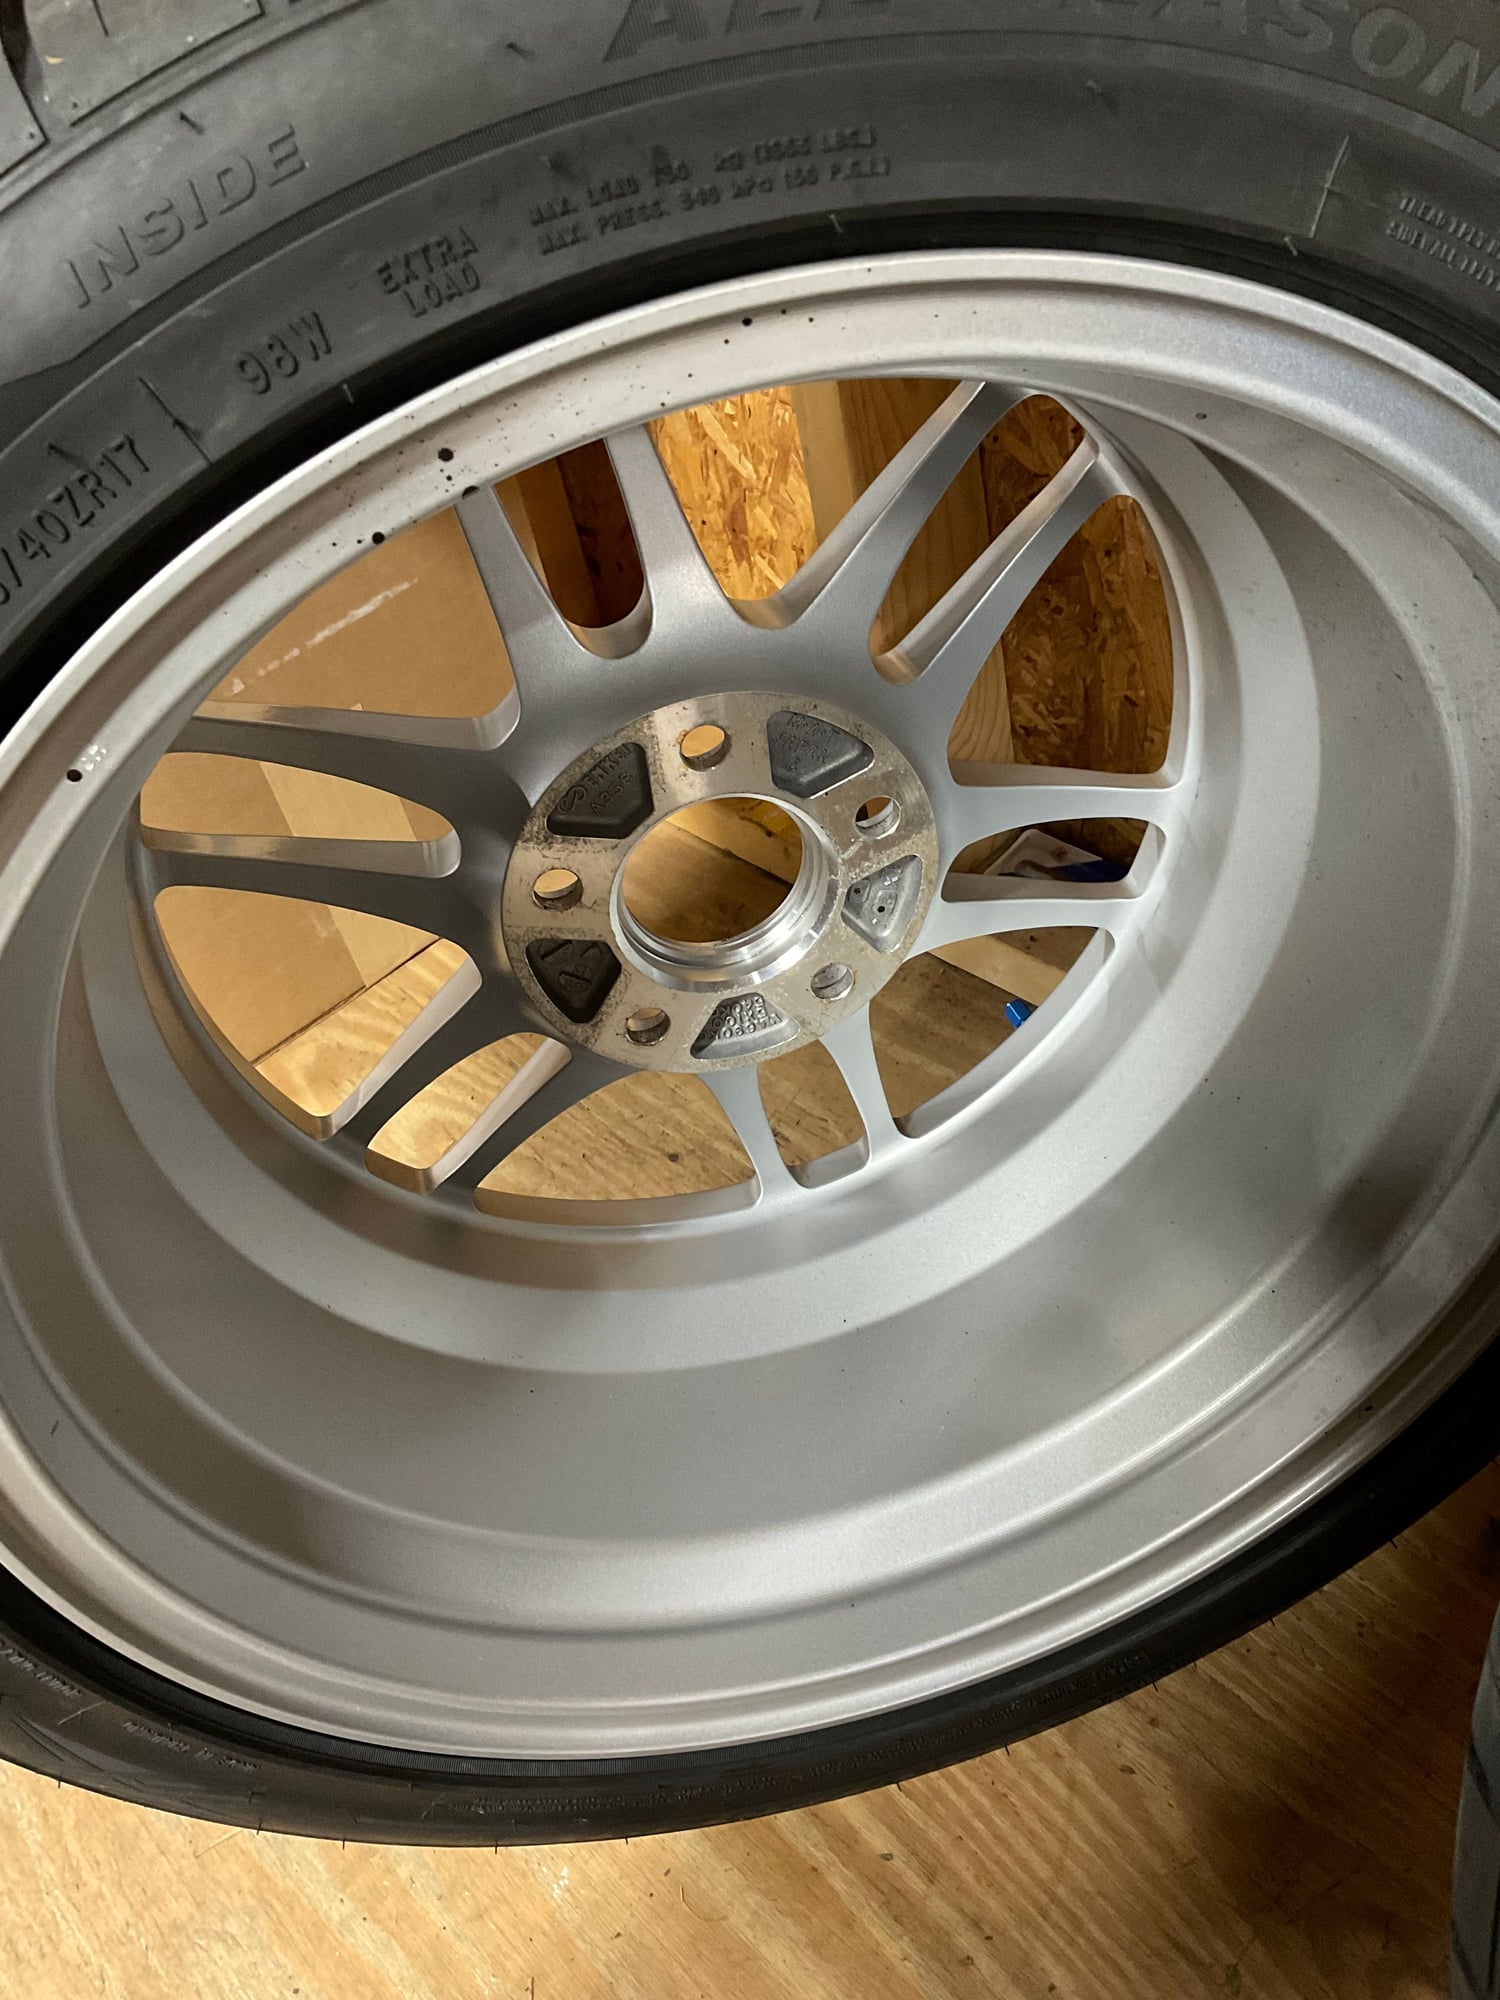 Accessories - New Enkei RPF1 17x9 35 Offset Complete set (4 Rims) Brand New Tires 255/40/17 RX7 FD - New - 1992 to 2002 Mazda RX-7 - Prince Frederick, MD 20678, United States